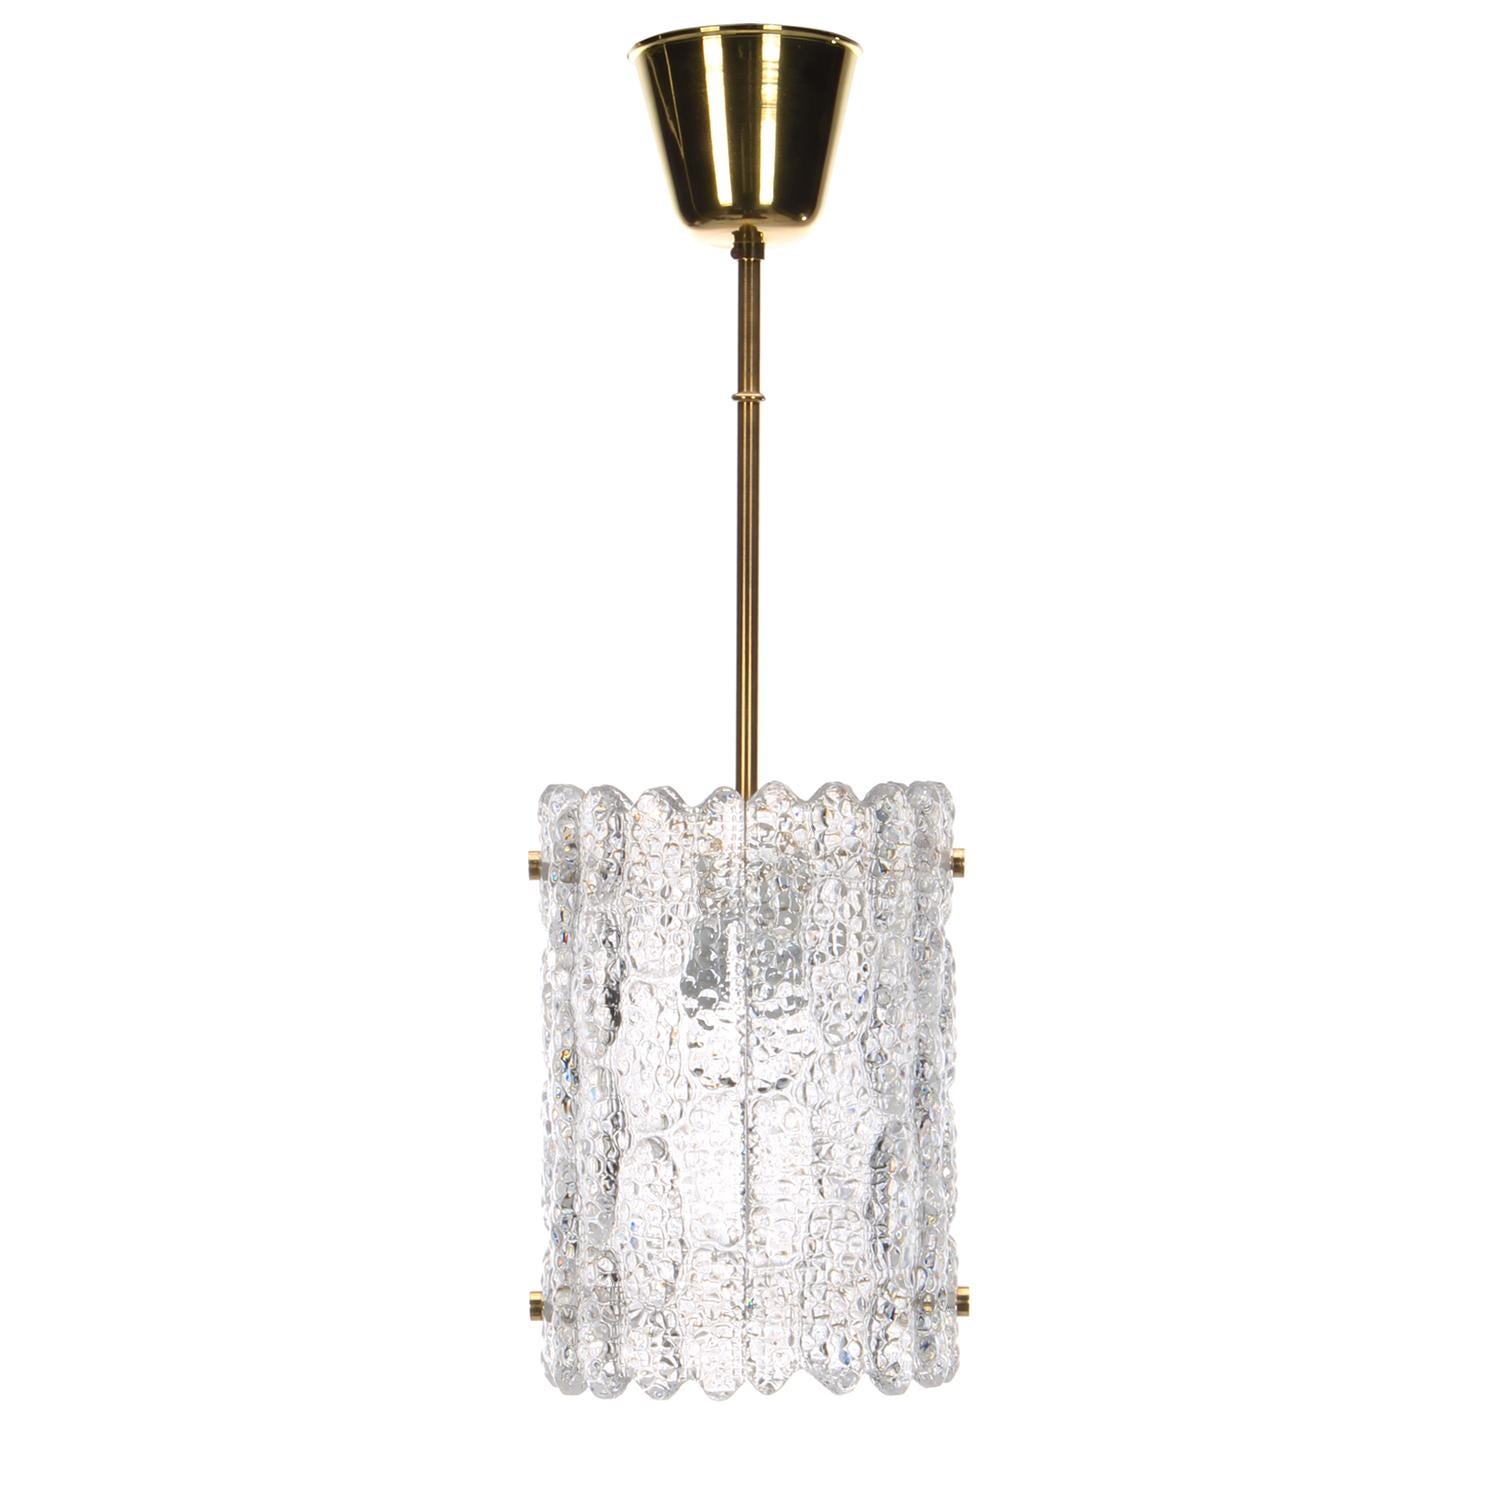 Orrefors Gefion Crystal and Brass Pendant by Fagerlund for Lyfa/Orrefors, 1960s For Sale